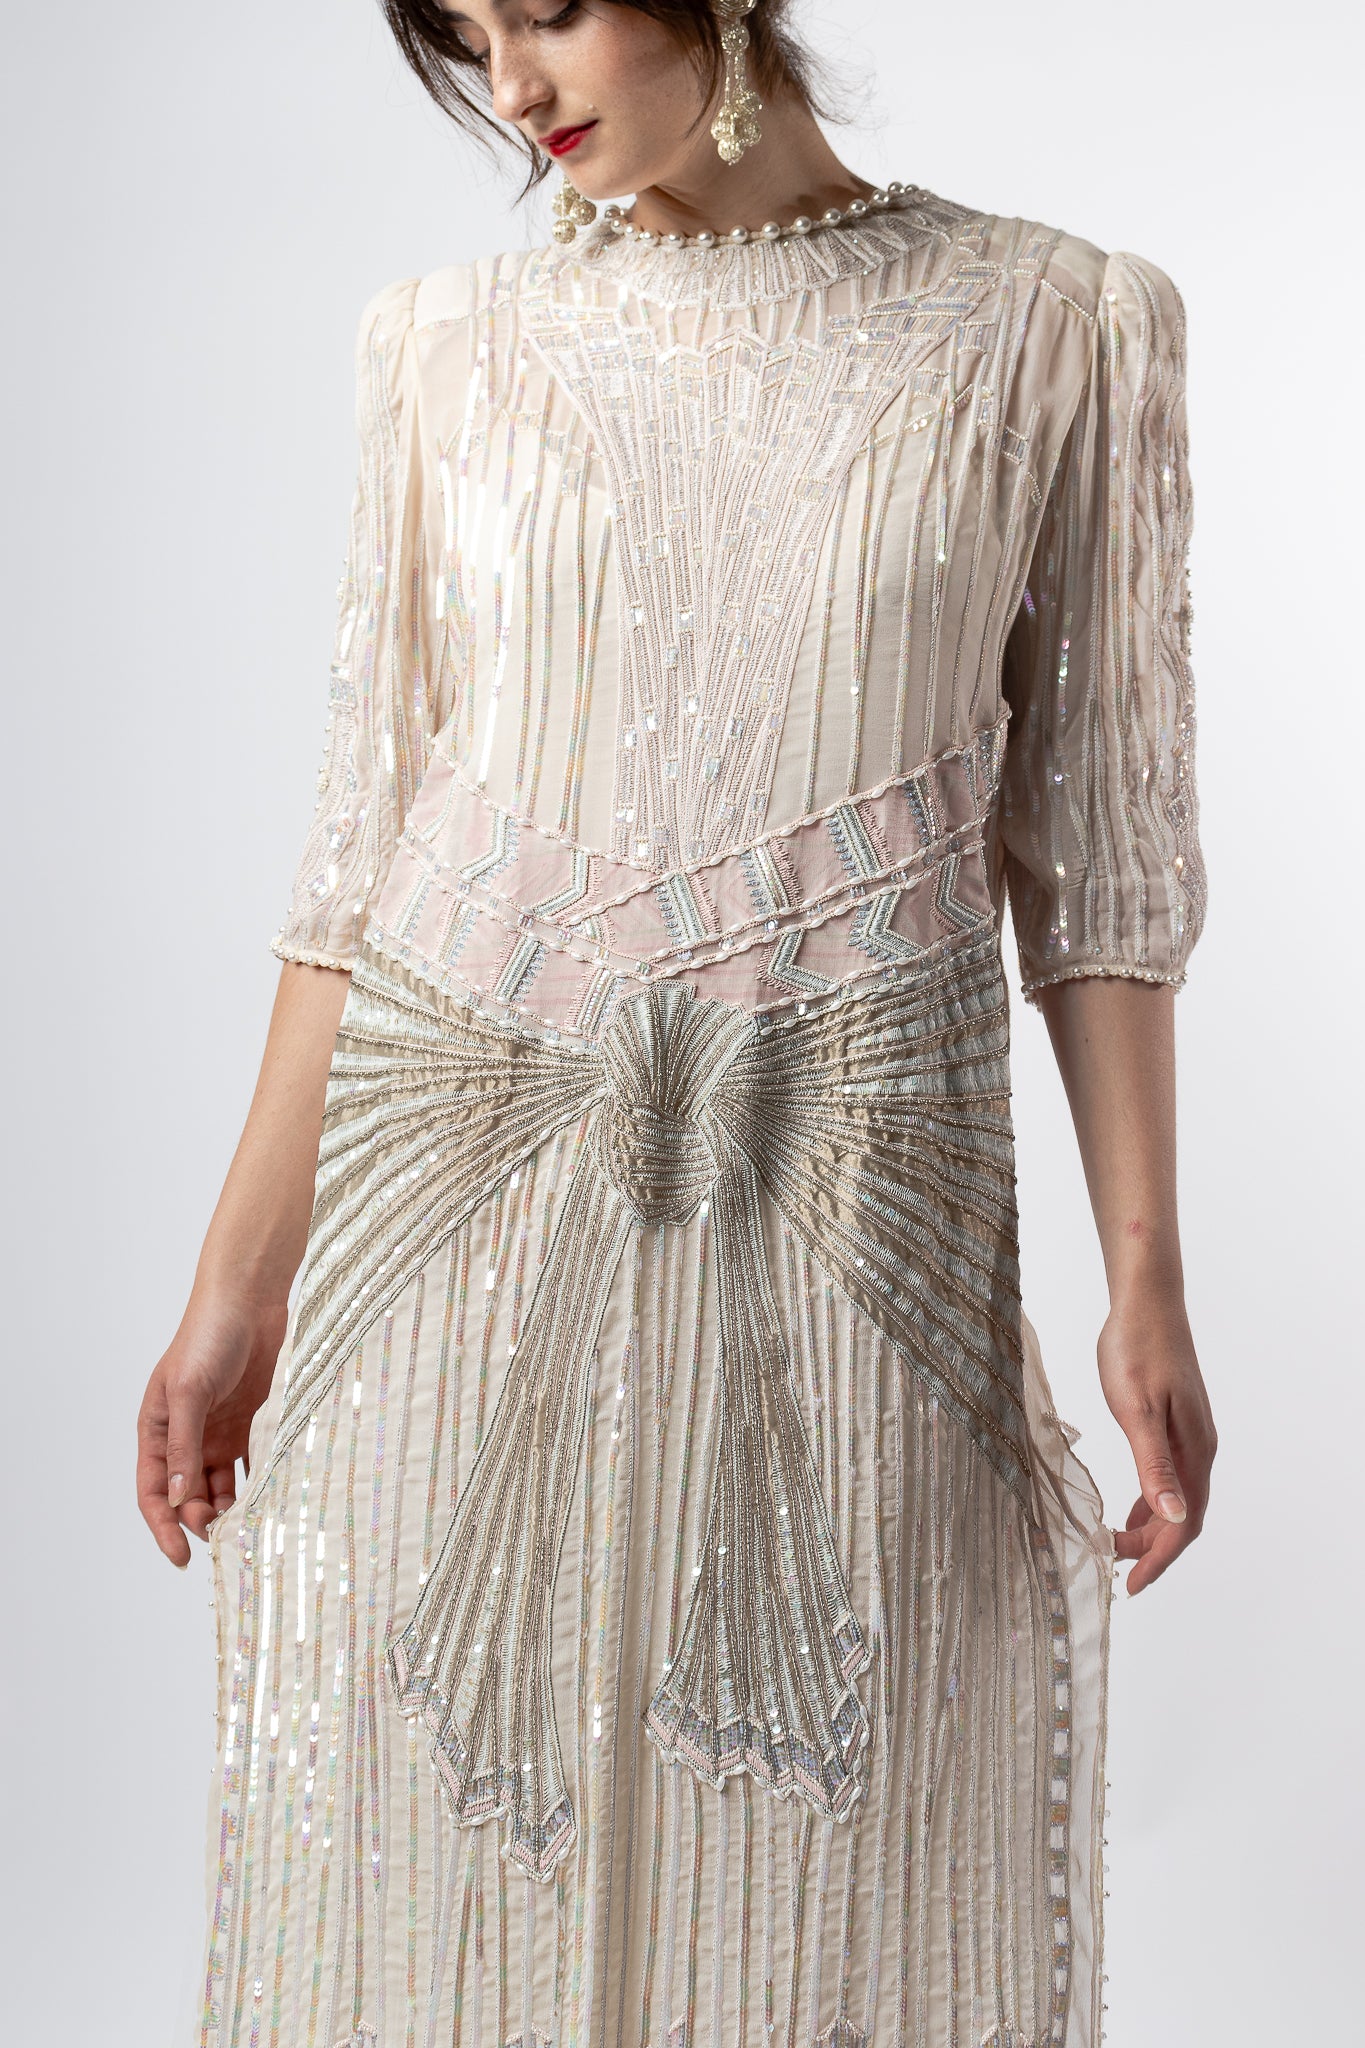 Recess Los Angeles Vintage Consignment Romy Reiner Zandra Rhodes Beaded Layered Gown